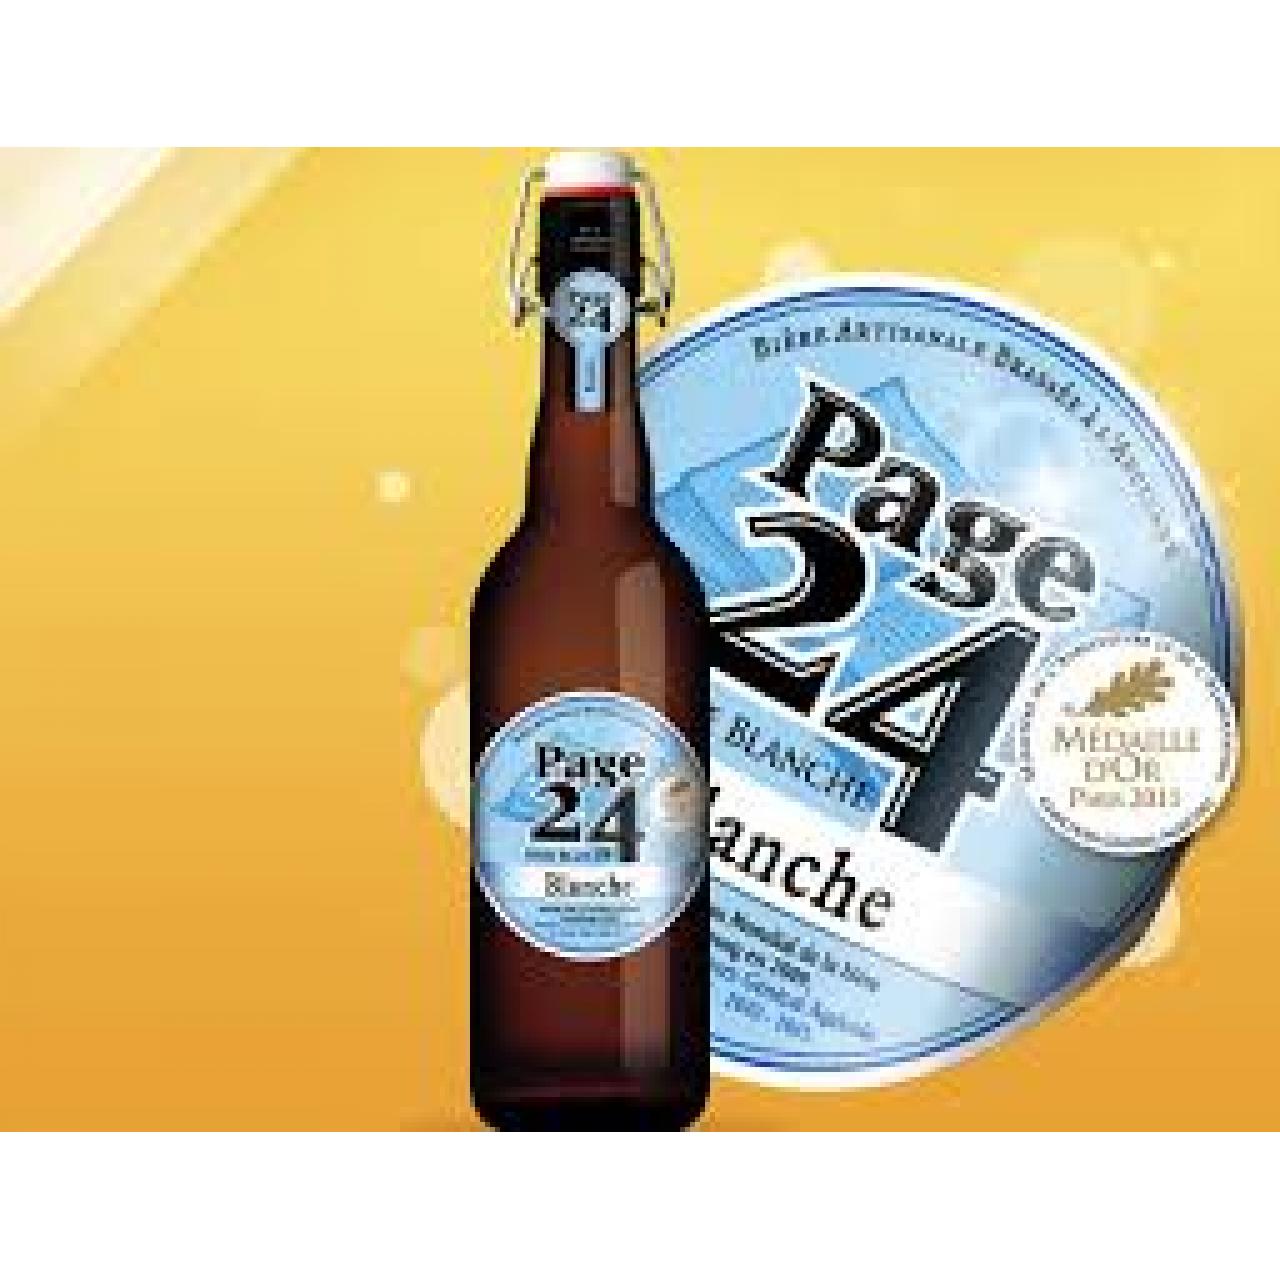 PAGE 24 BLANCHE 4.9% 33CL